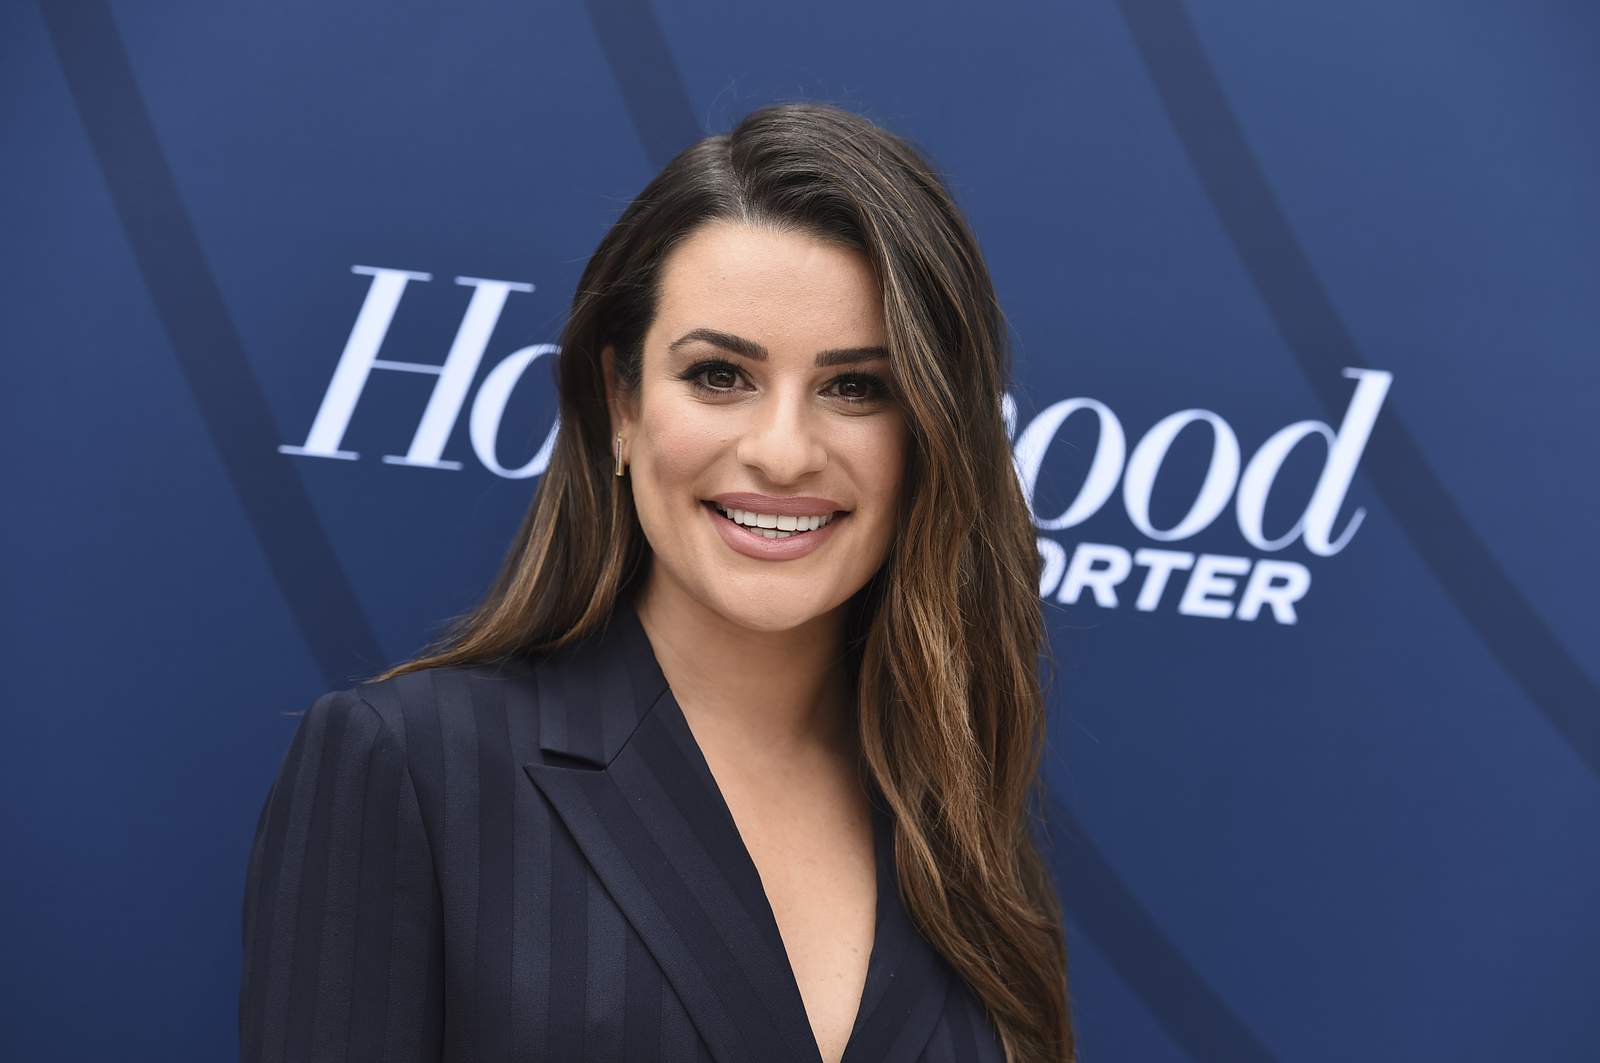 Lea Michele apologizes for being 'difficult' on 'Glee' set